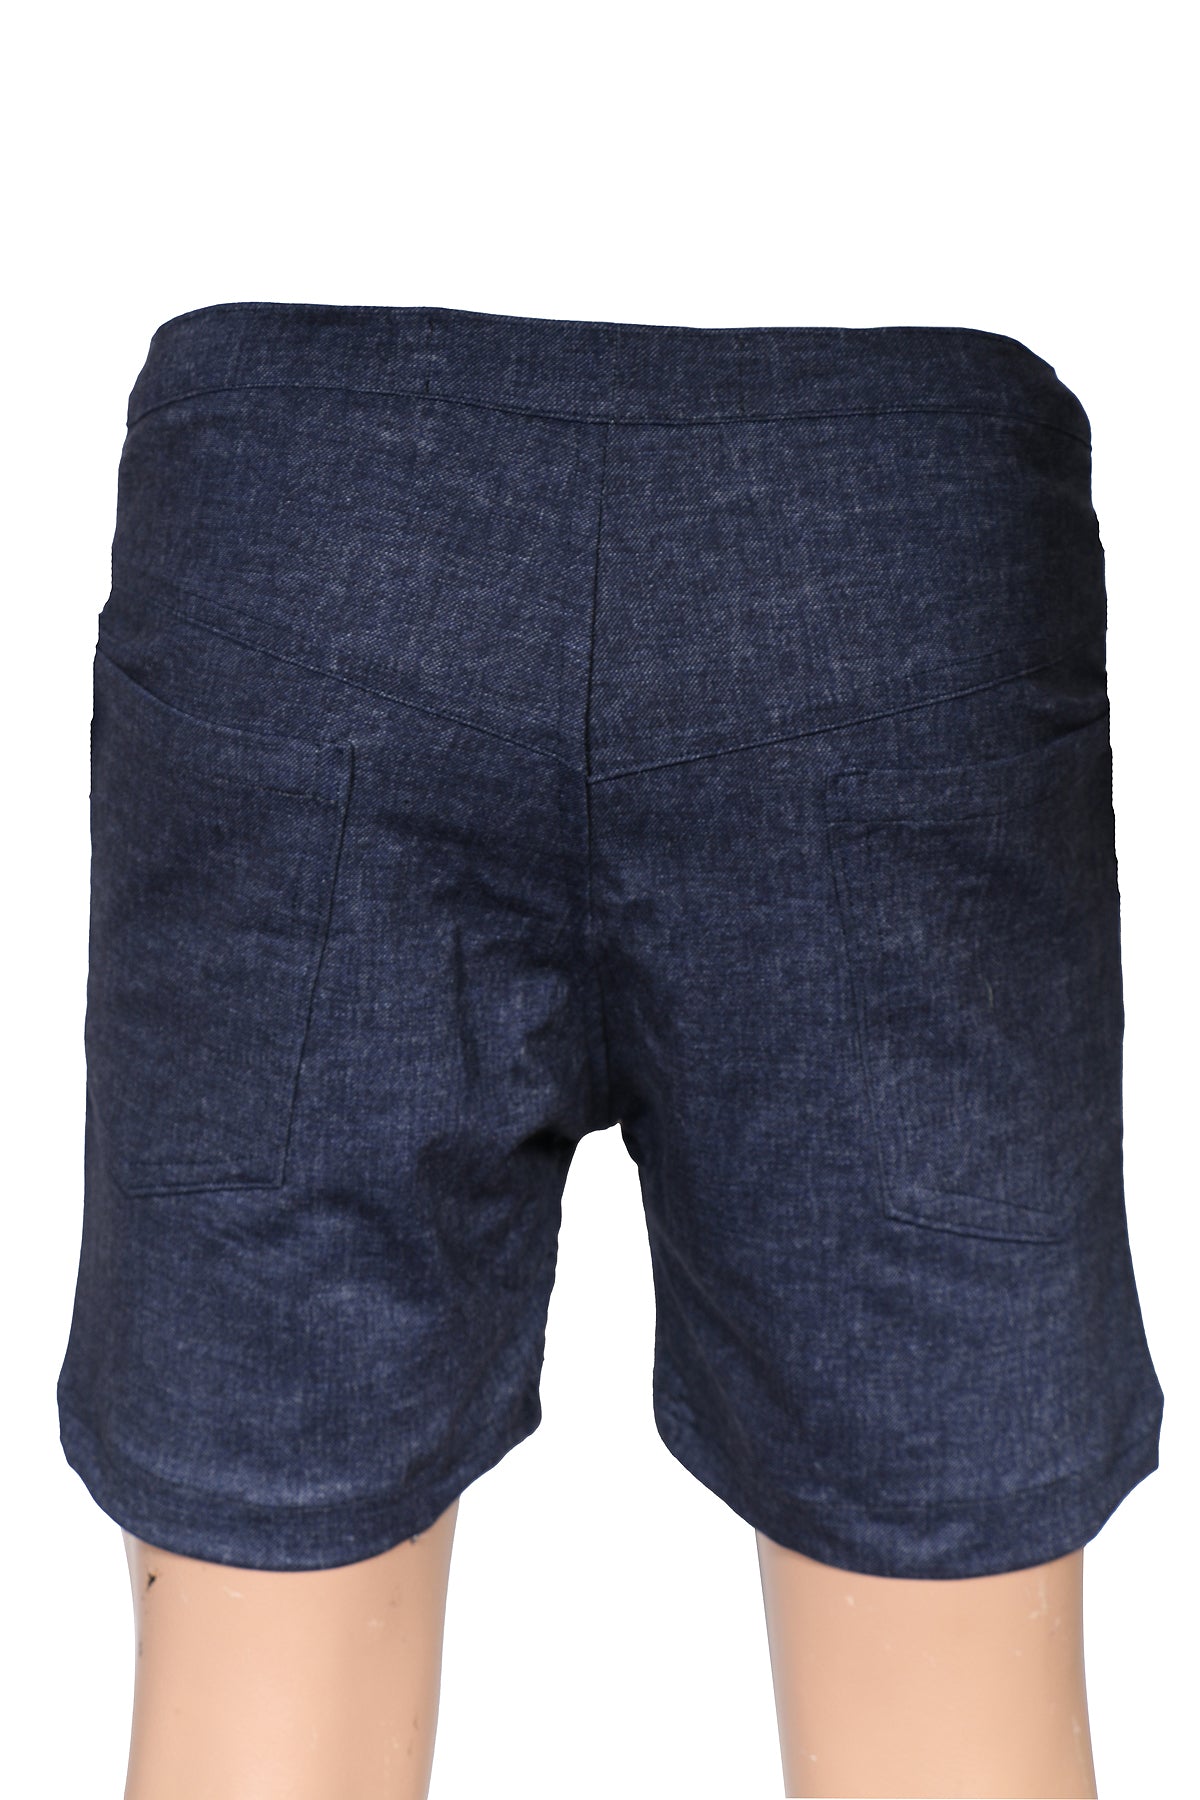 Short navy cut-out jeans for HIM